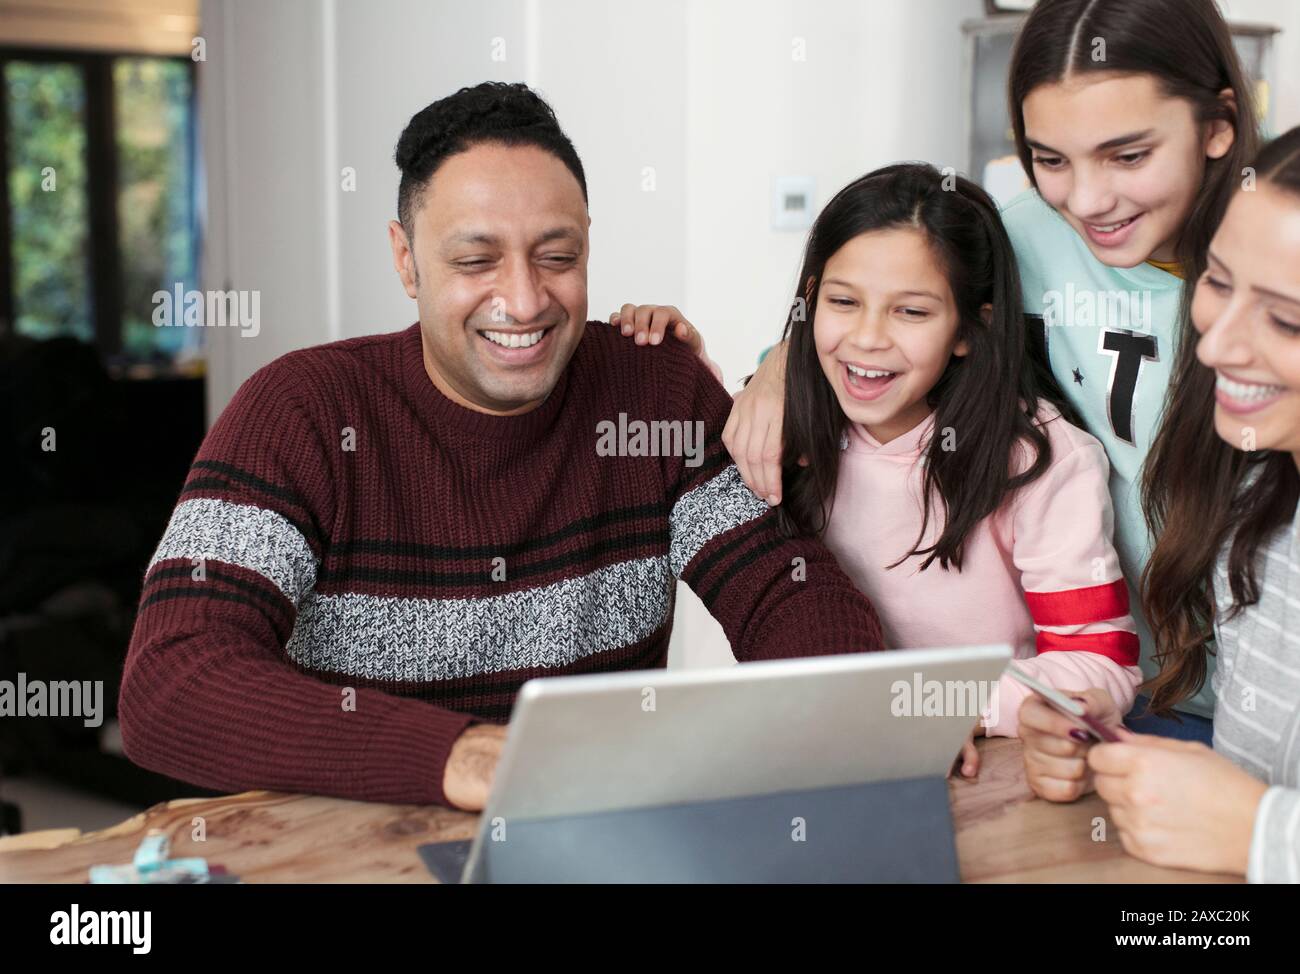 Happy family using digital tablet at table Stock Photo